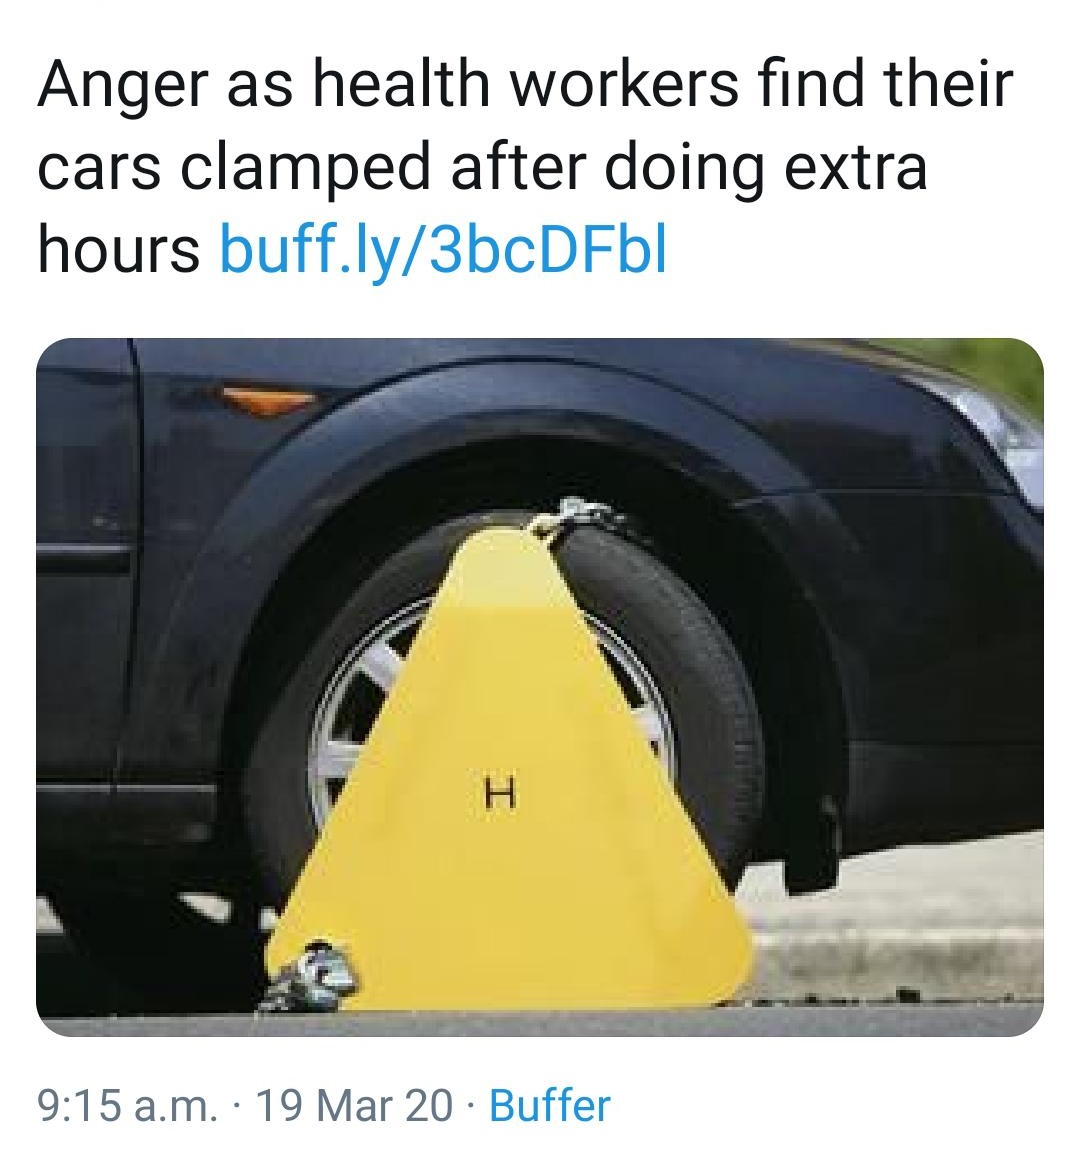 wheel clamp - Anger as health workers find their cars clamped after doing extra hours buff.ly3bcDFbl a.m. 19 Mar 20 Buffer